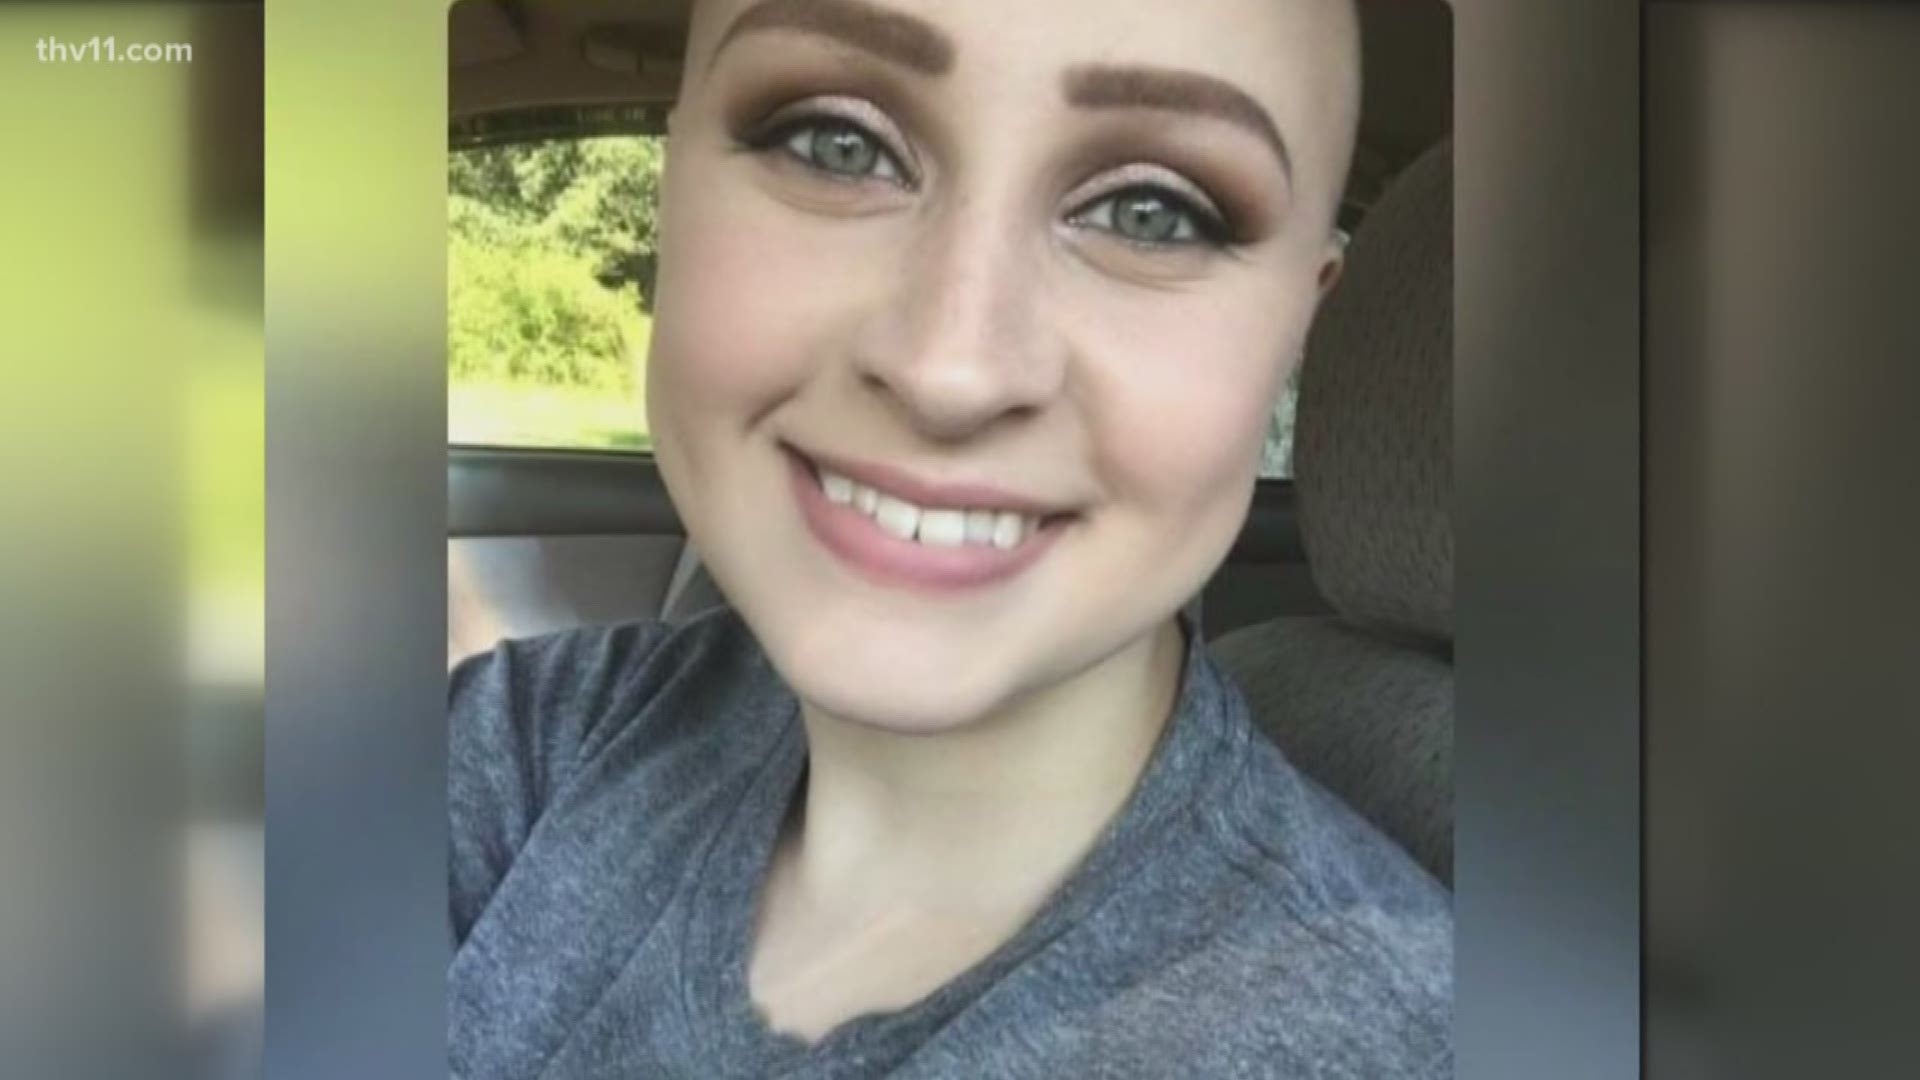 A well-known teen in the Lonoke community lost her fight to cancer on Thursday.